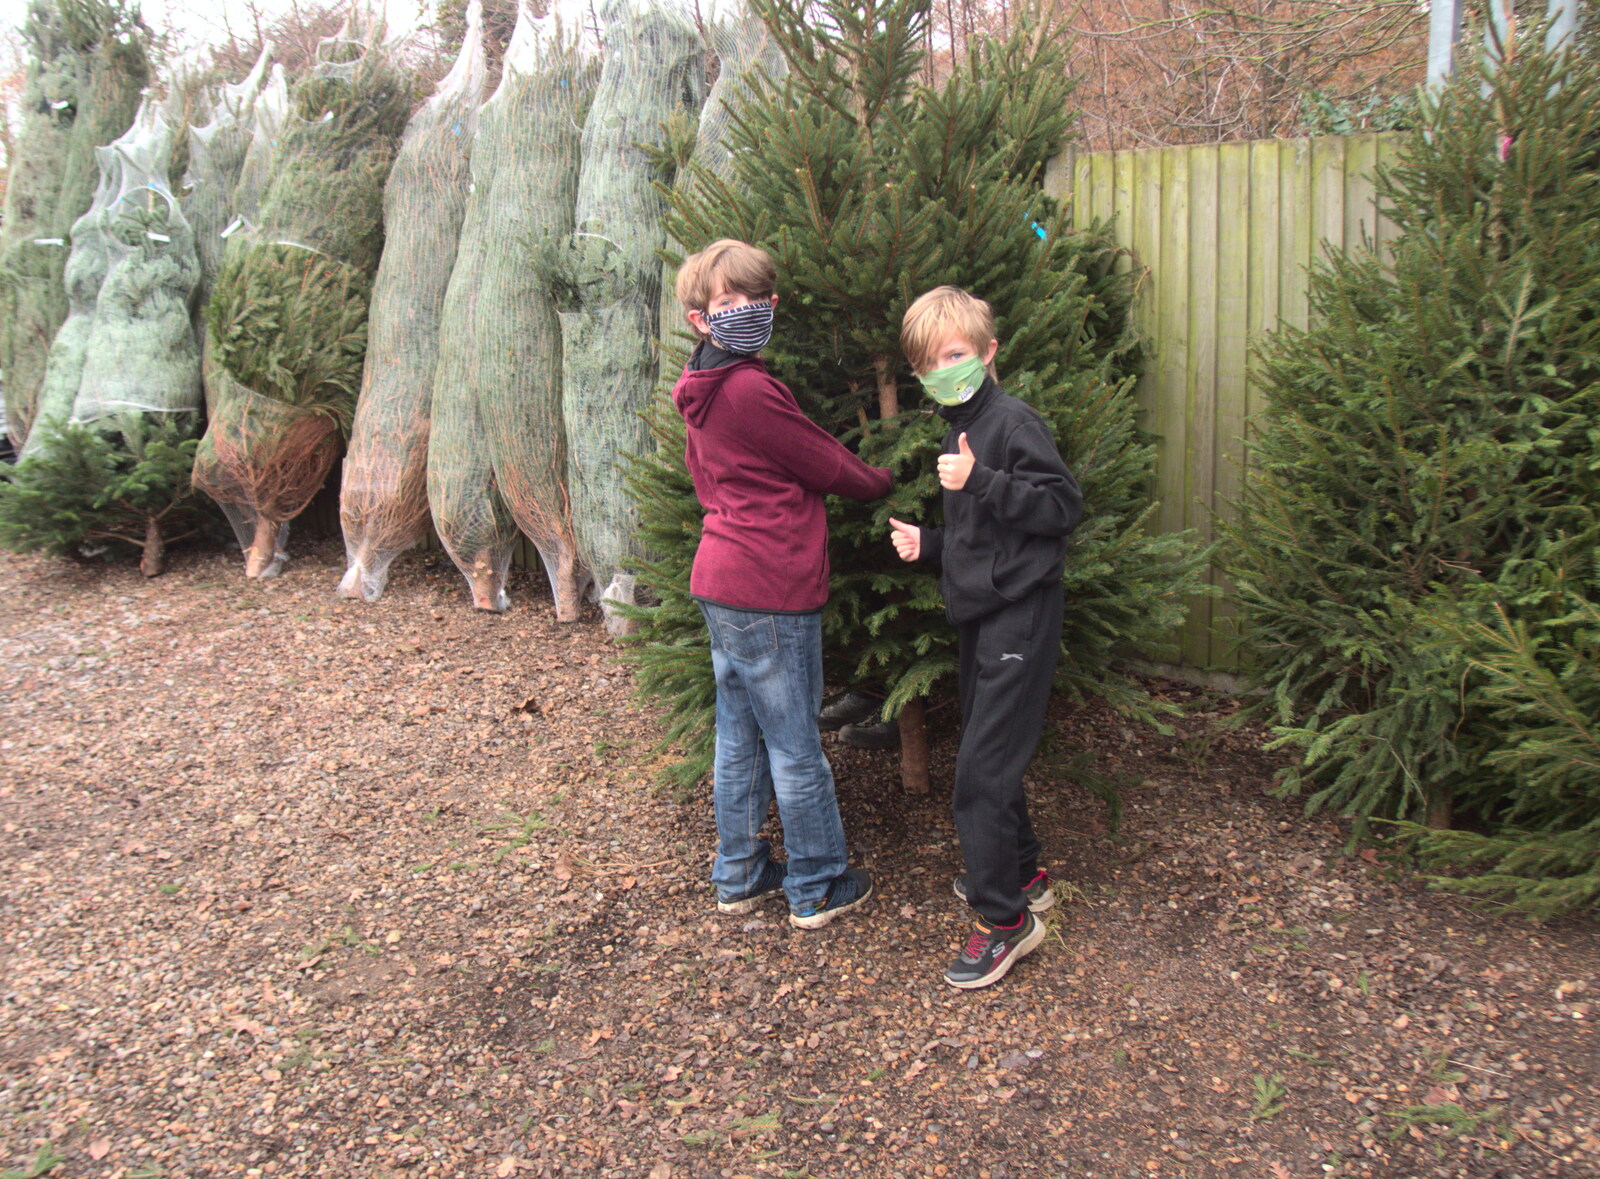 The boys have approved a tree from Frosty Rides and a Christmas Tree, Diss Garden Centre, Diss, Norfolk - 29th November 2020